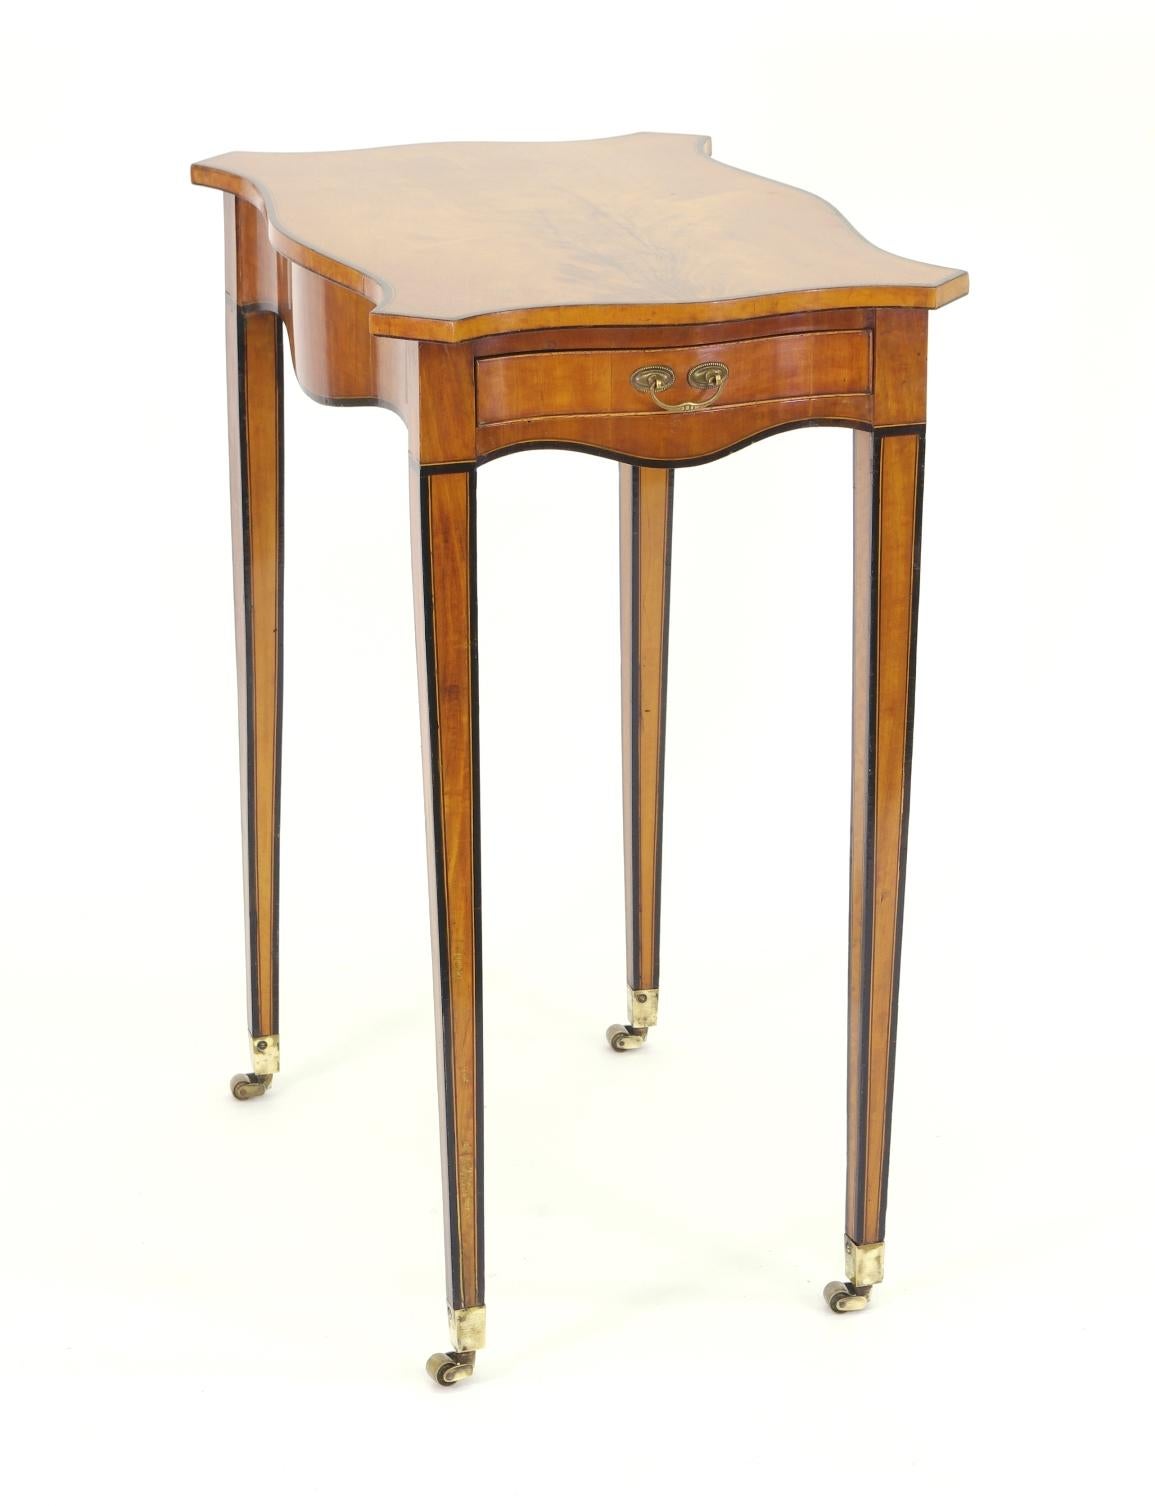 George III satinwood side table, the serpentine top with beautifully figured veneer and ebony banded edge over the conforming apron with a single drawer; the square tapering banded legs ending with brass casters.